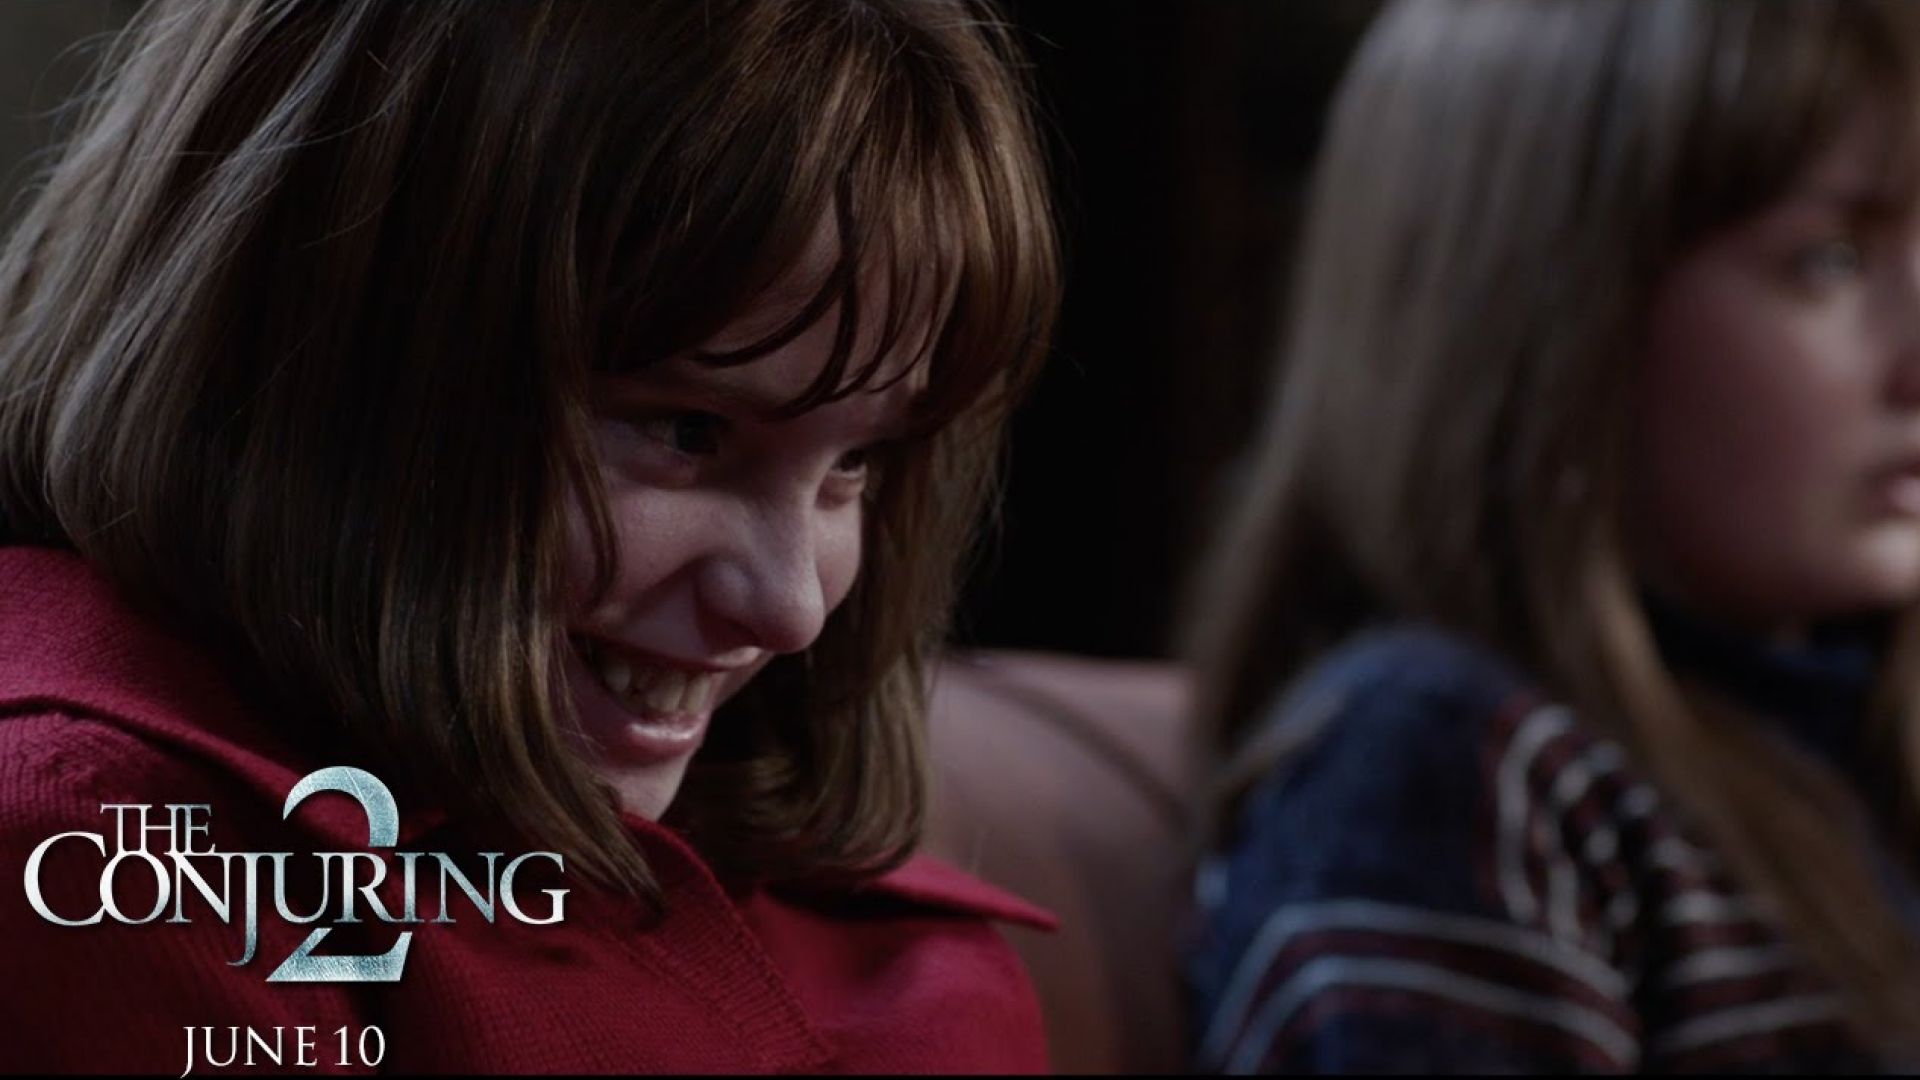 The Conjuring featurette explores what it takes to redefine 